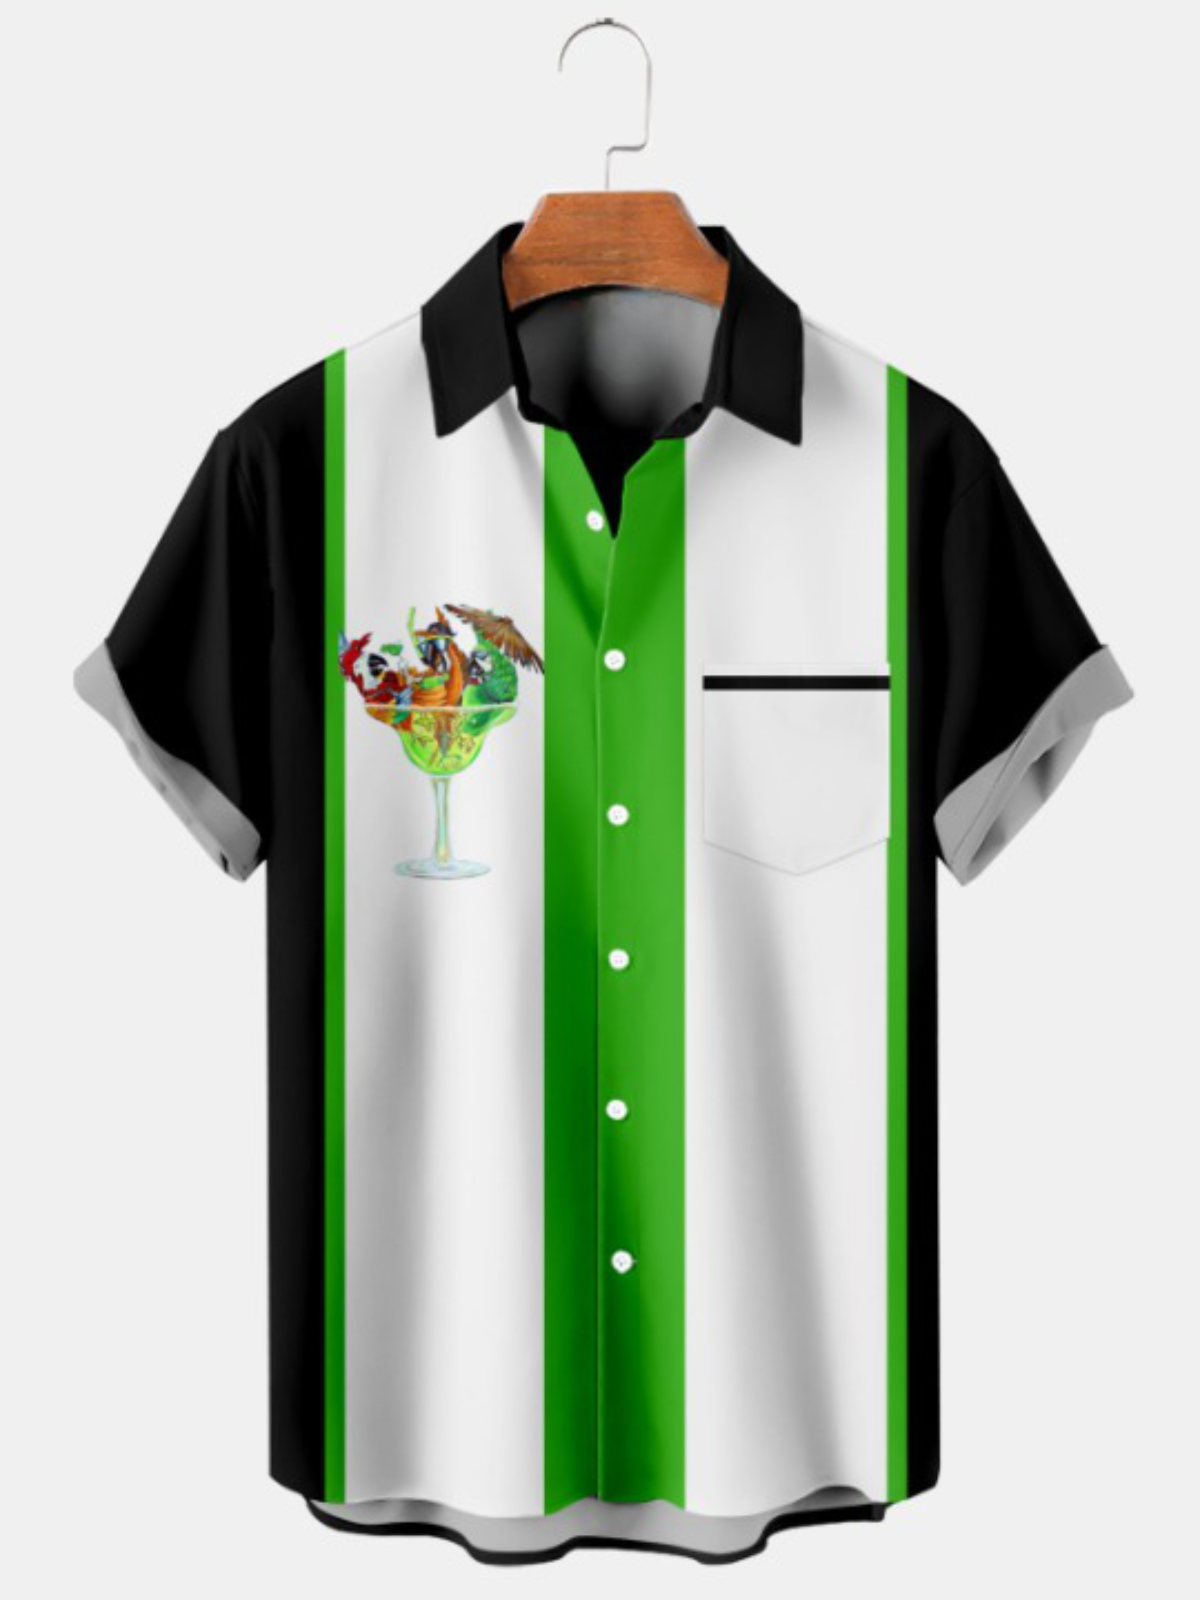 Stripe patterned And Parrot Print Bowling Shirt